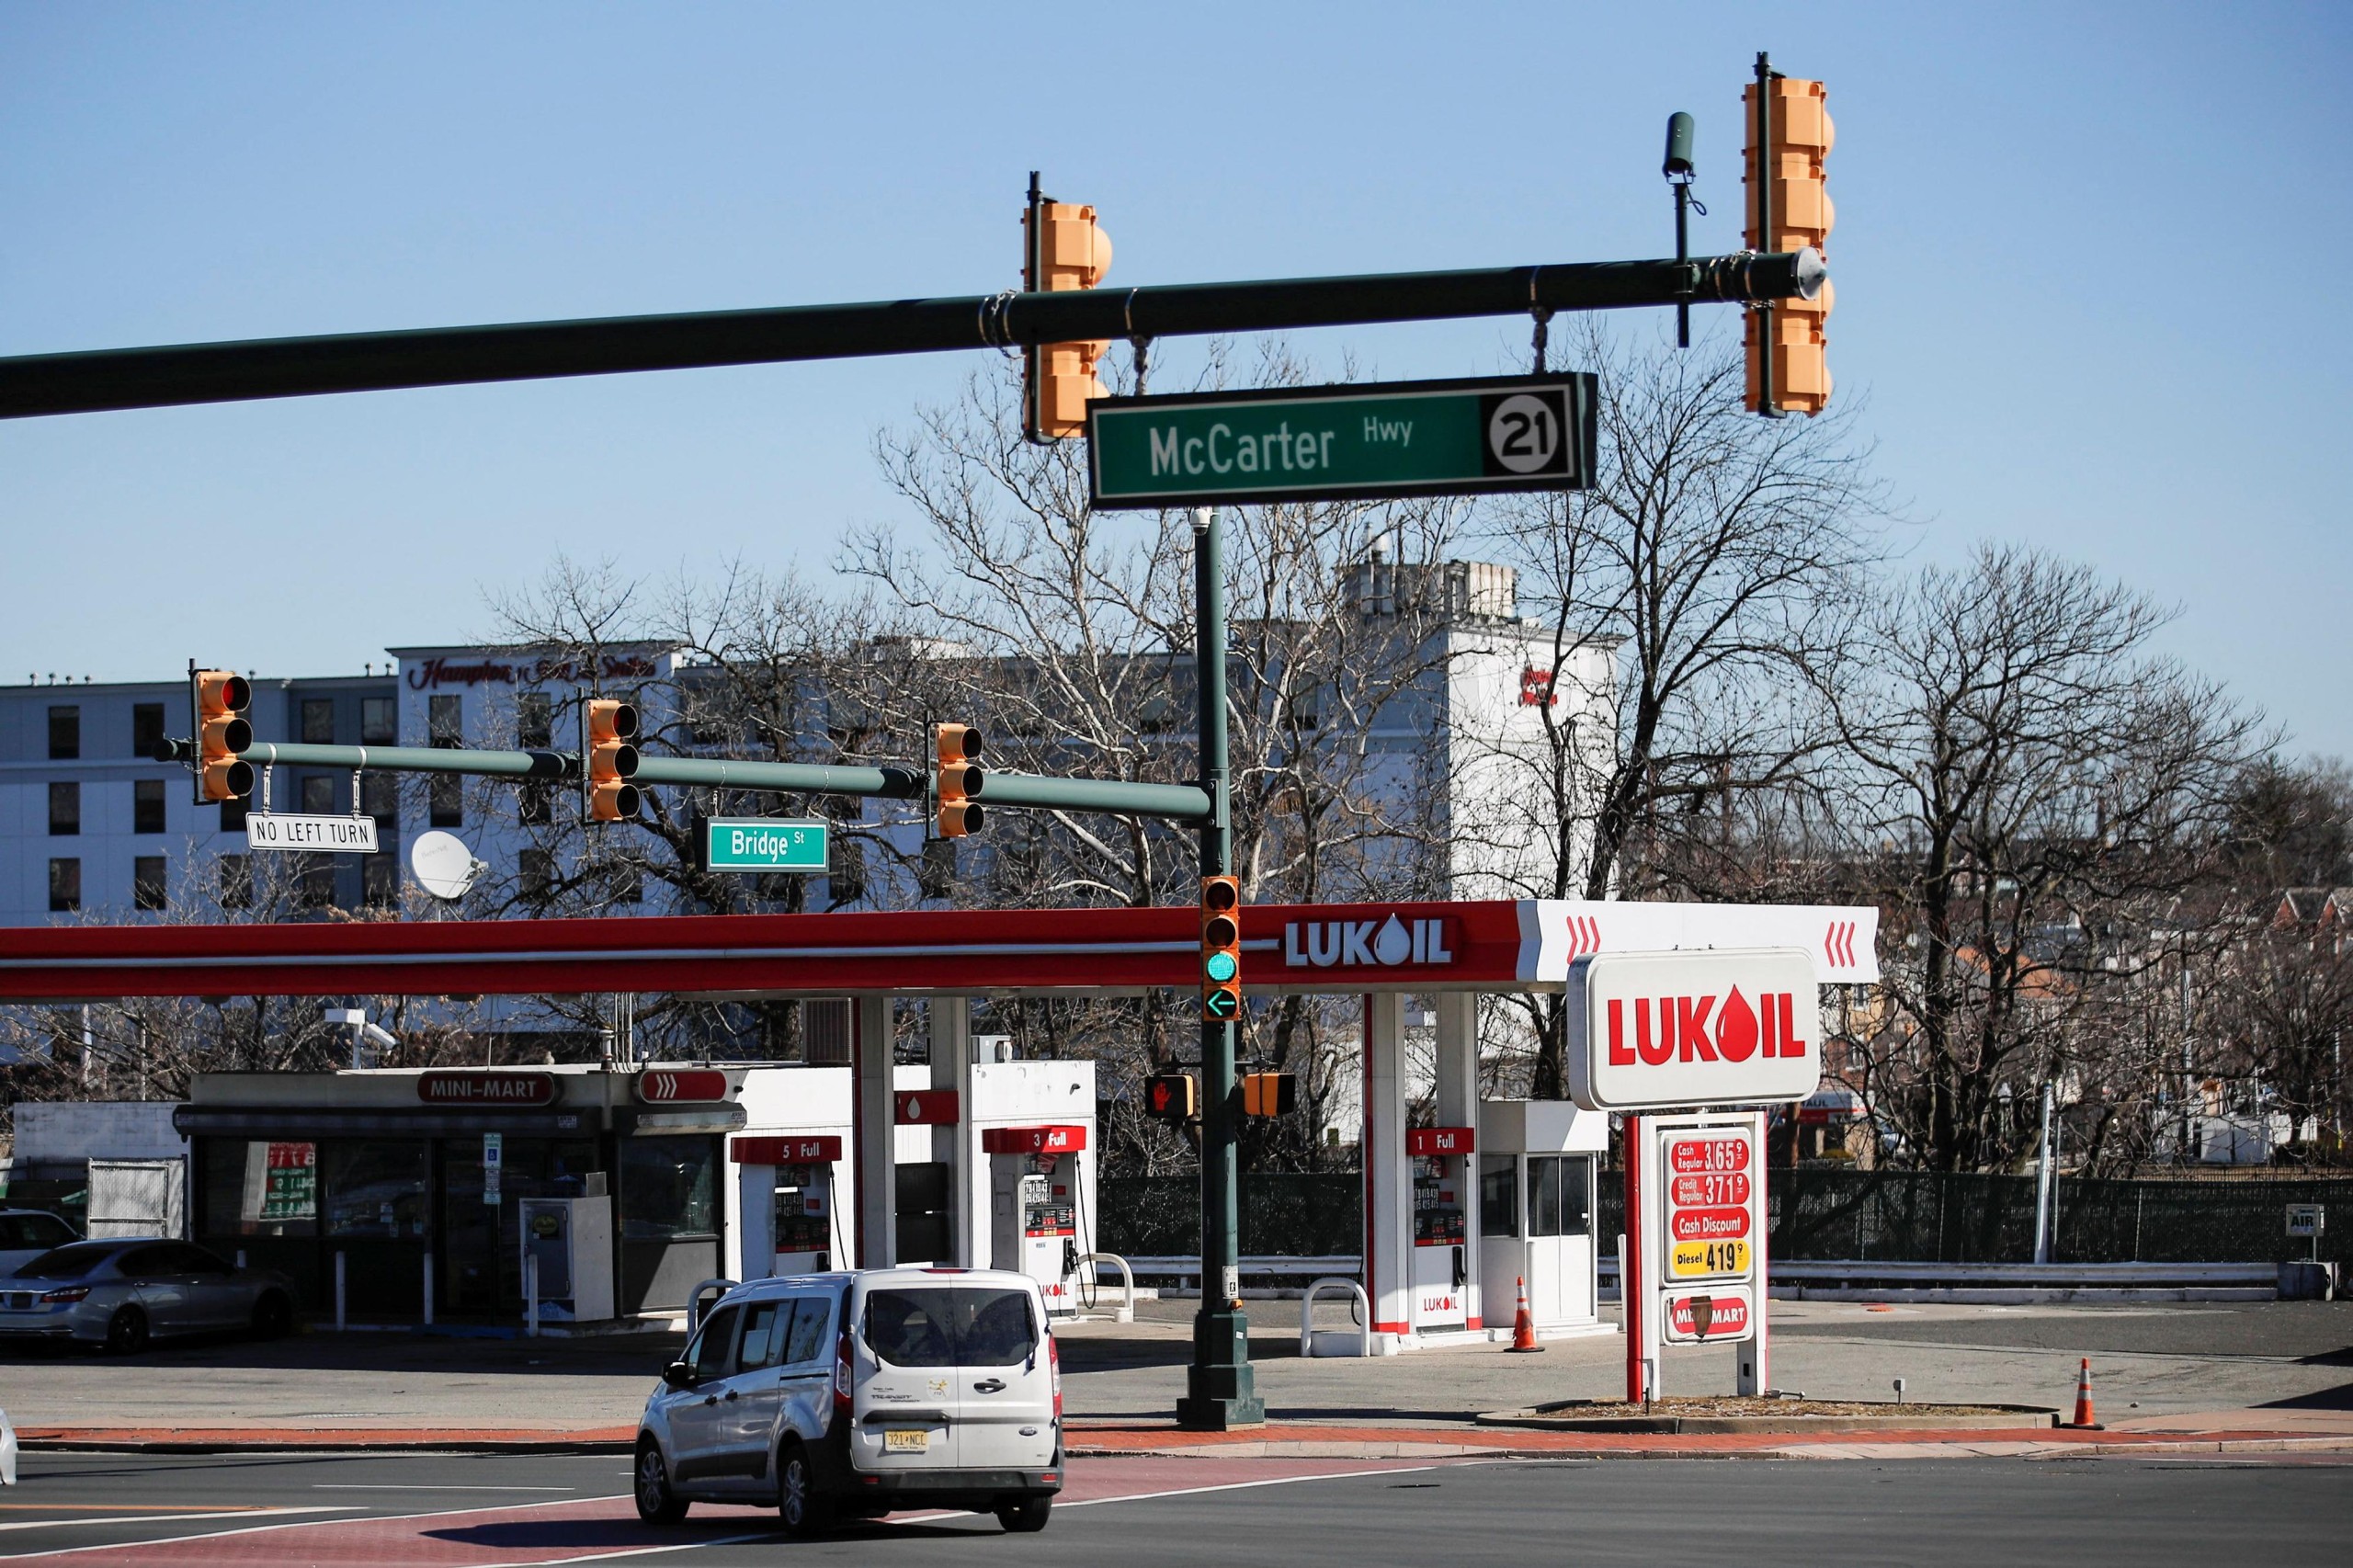 A Lukoil fuel station is pictured after local officials voted to suspend the business license of local Lukoil gas stations following the Russian's invasion of Ukraine, in Newark, New Jersey, U.S., March 3, 2022. REUTERS/Eduardo Munoz Photo: EDUARDO MUNOZ/REUTERS